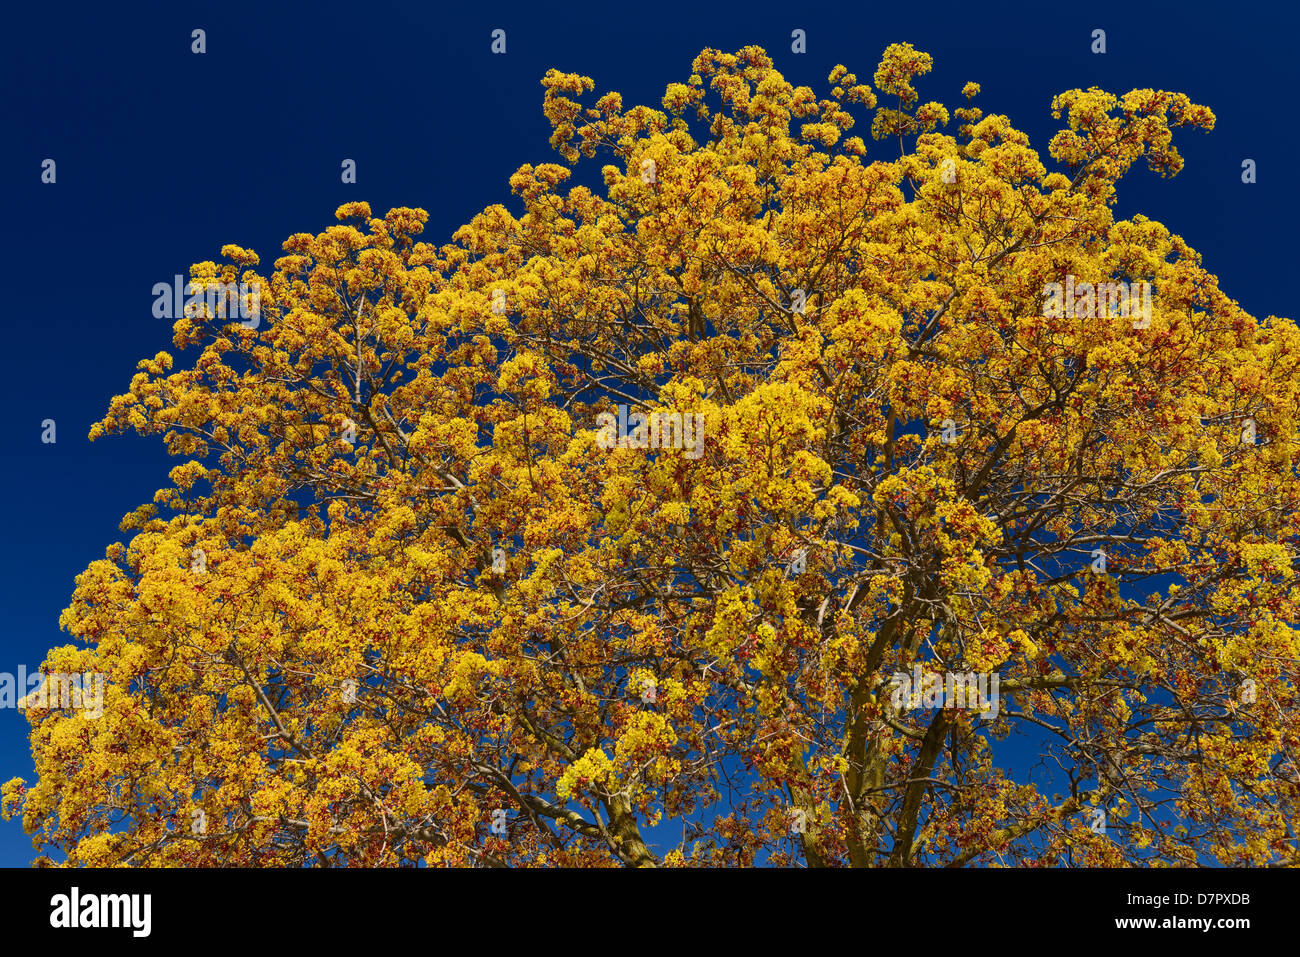 Yellow red flowers on a Norway Maple tree cultivar Crimson King in Spring Toronto Canada against a clear blue sky Stock Photo